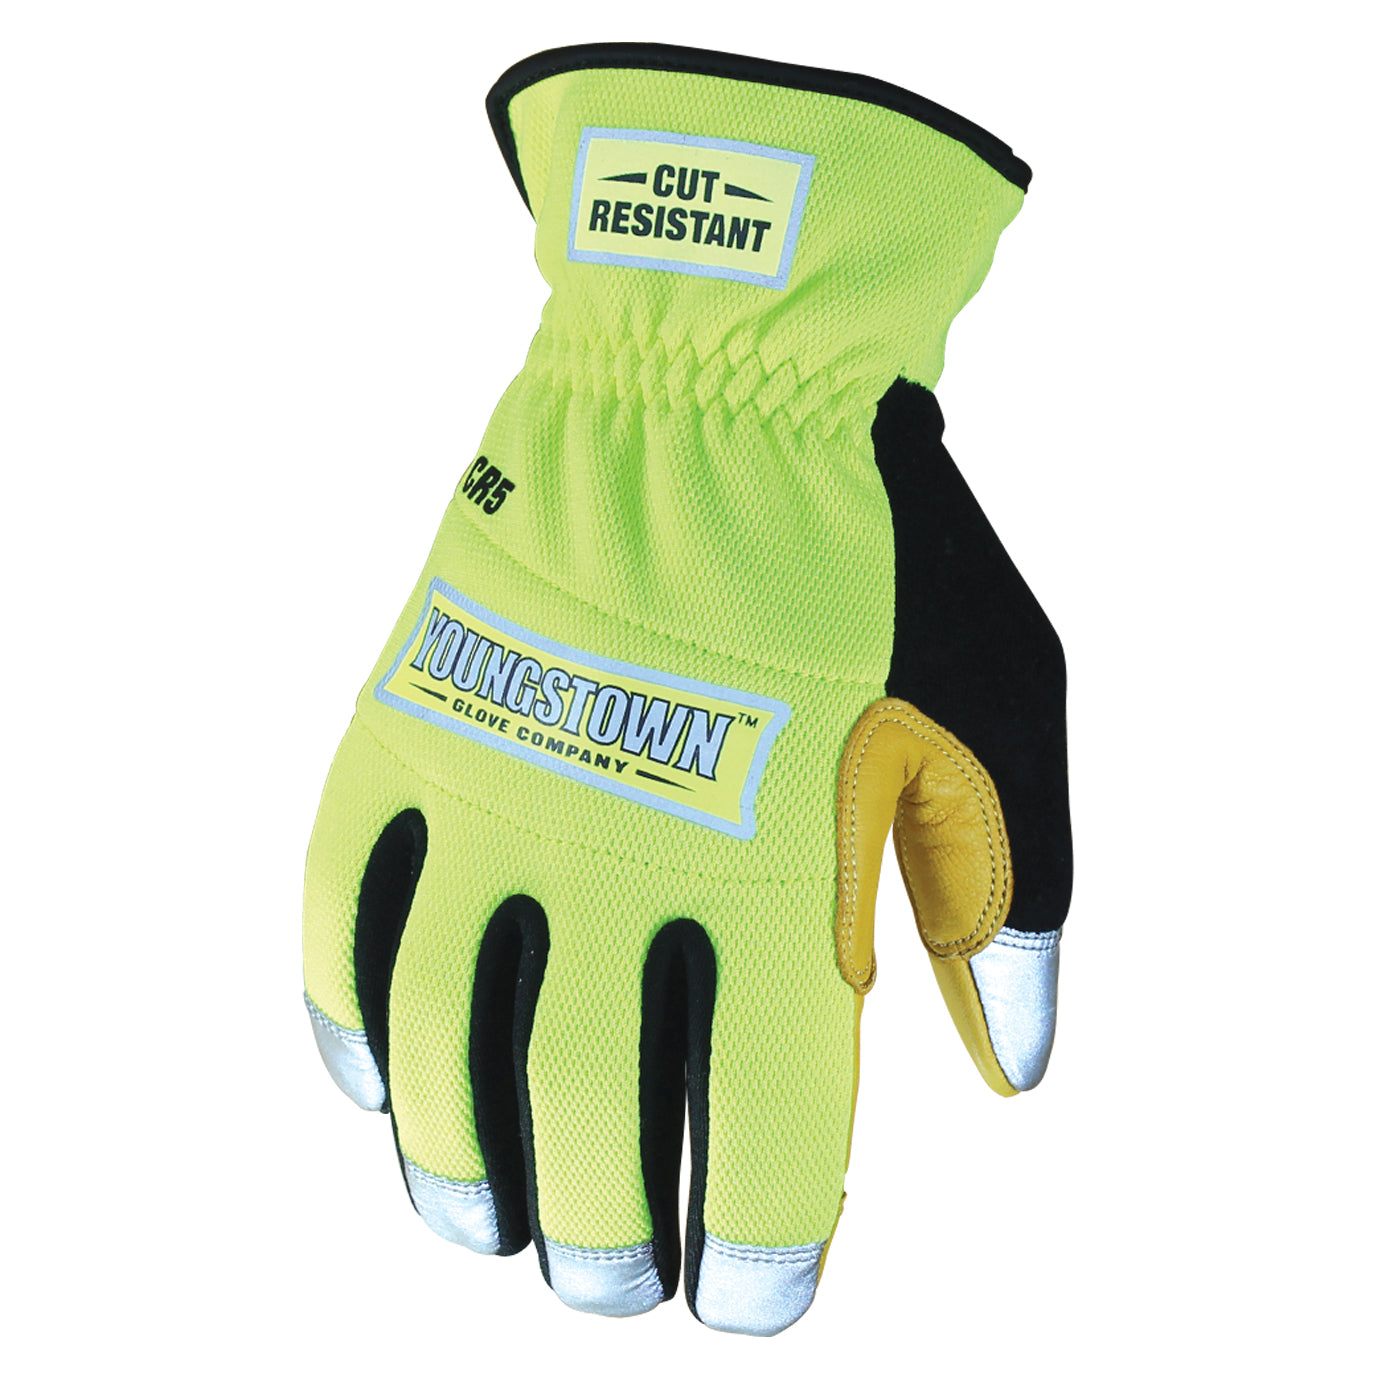 Youngstown Glove Cut Resistant General Utility Synthetic Work Gloves For  Men - Kevlar Lined - Gray